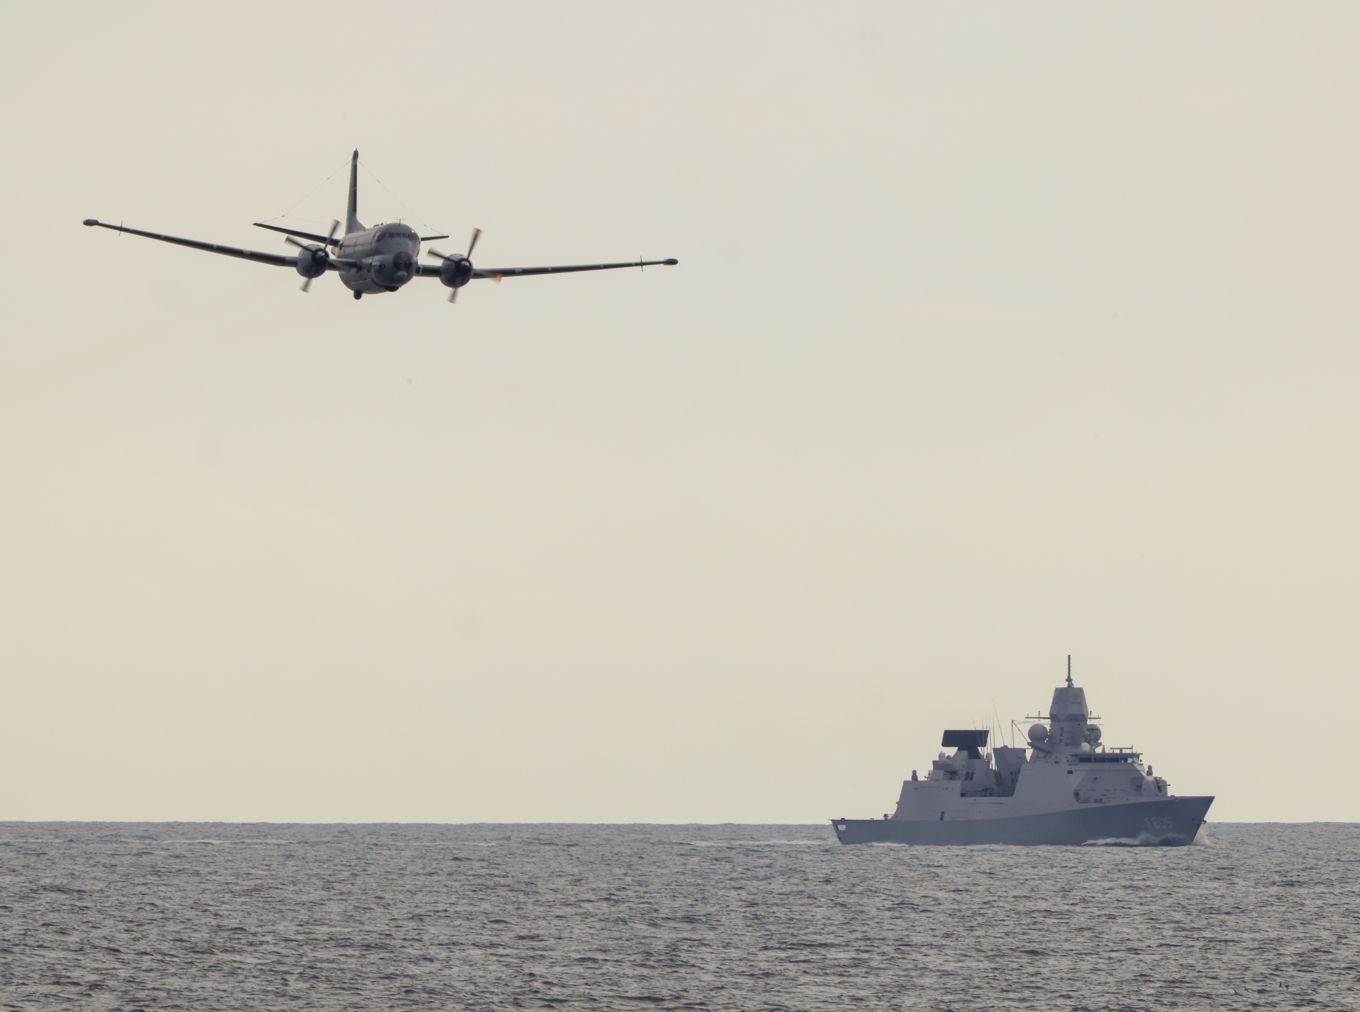 Long shot of a the Dutch destroyer warship and a French MPA Aircraft.